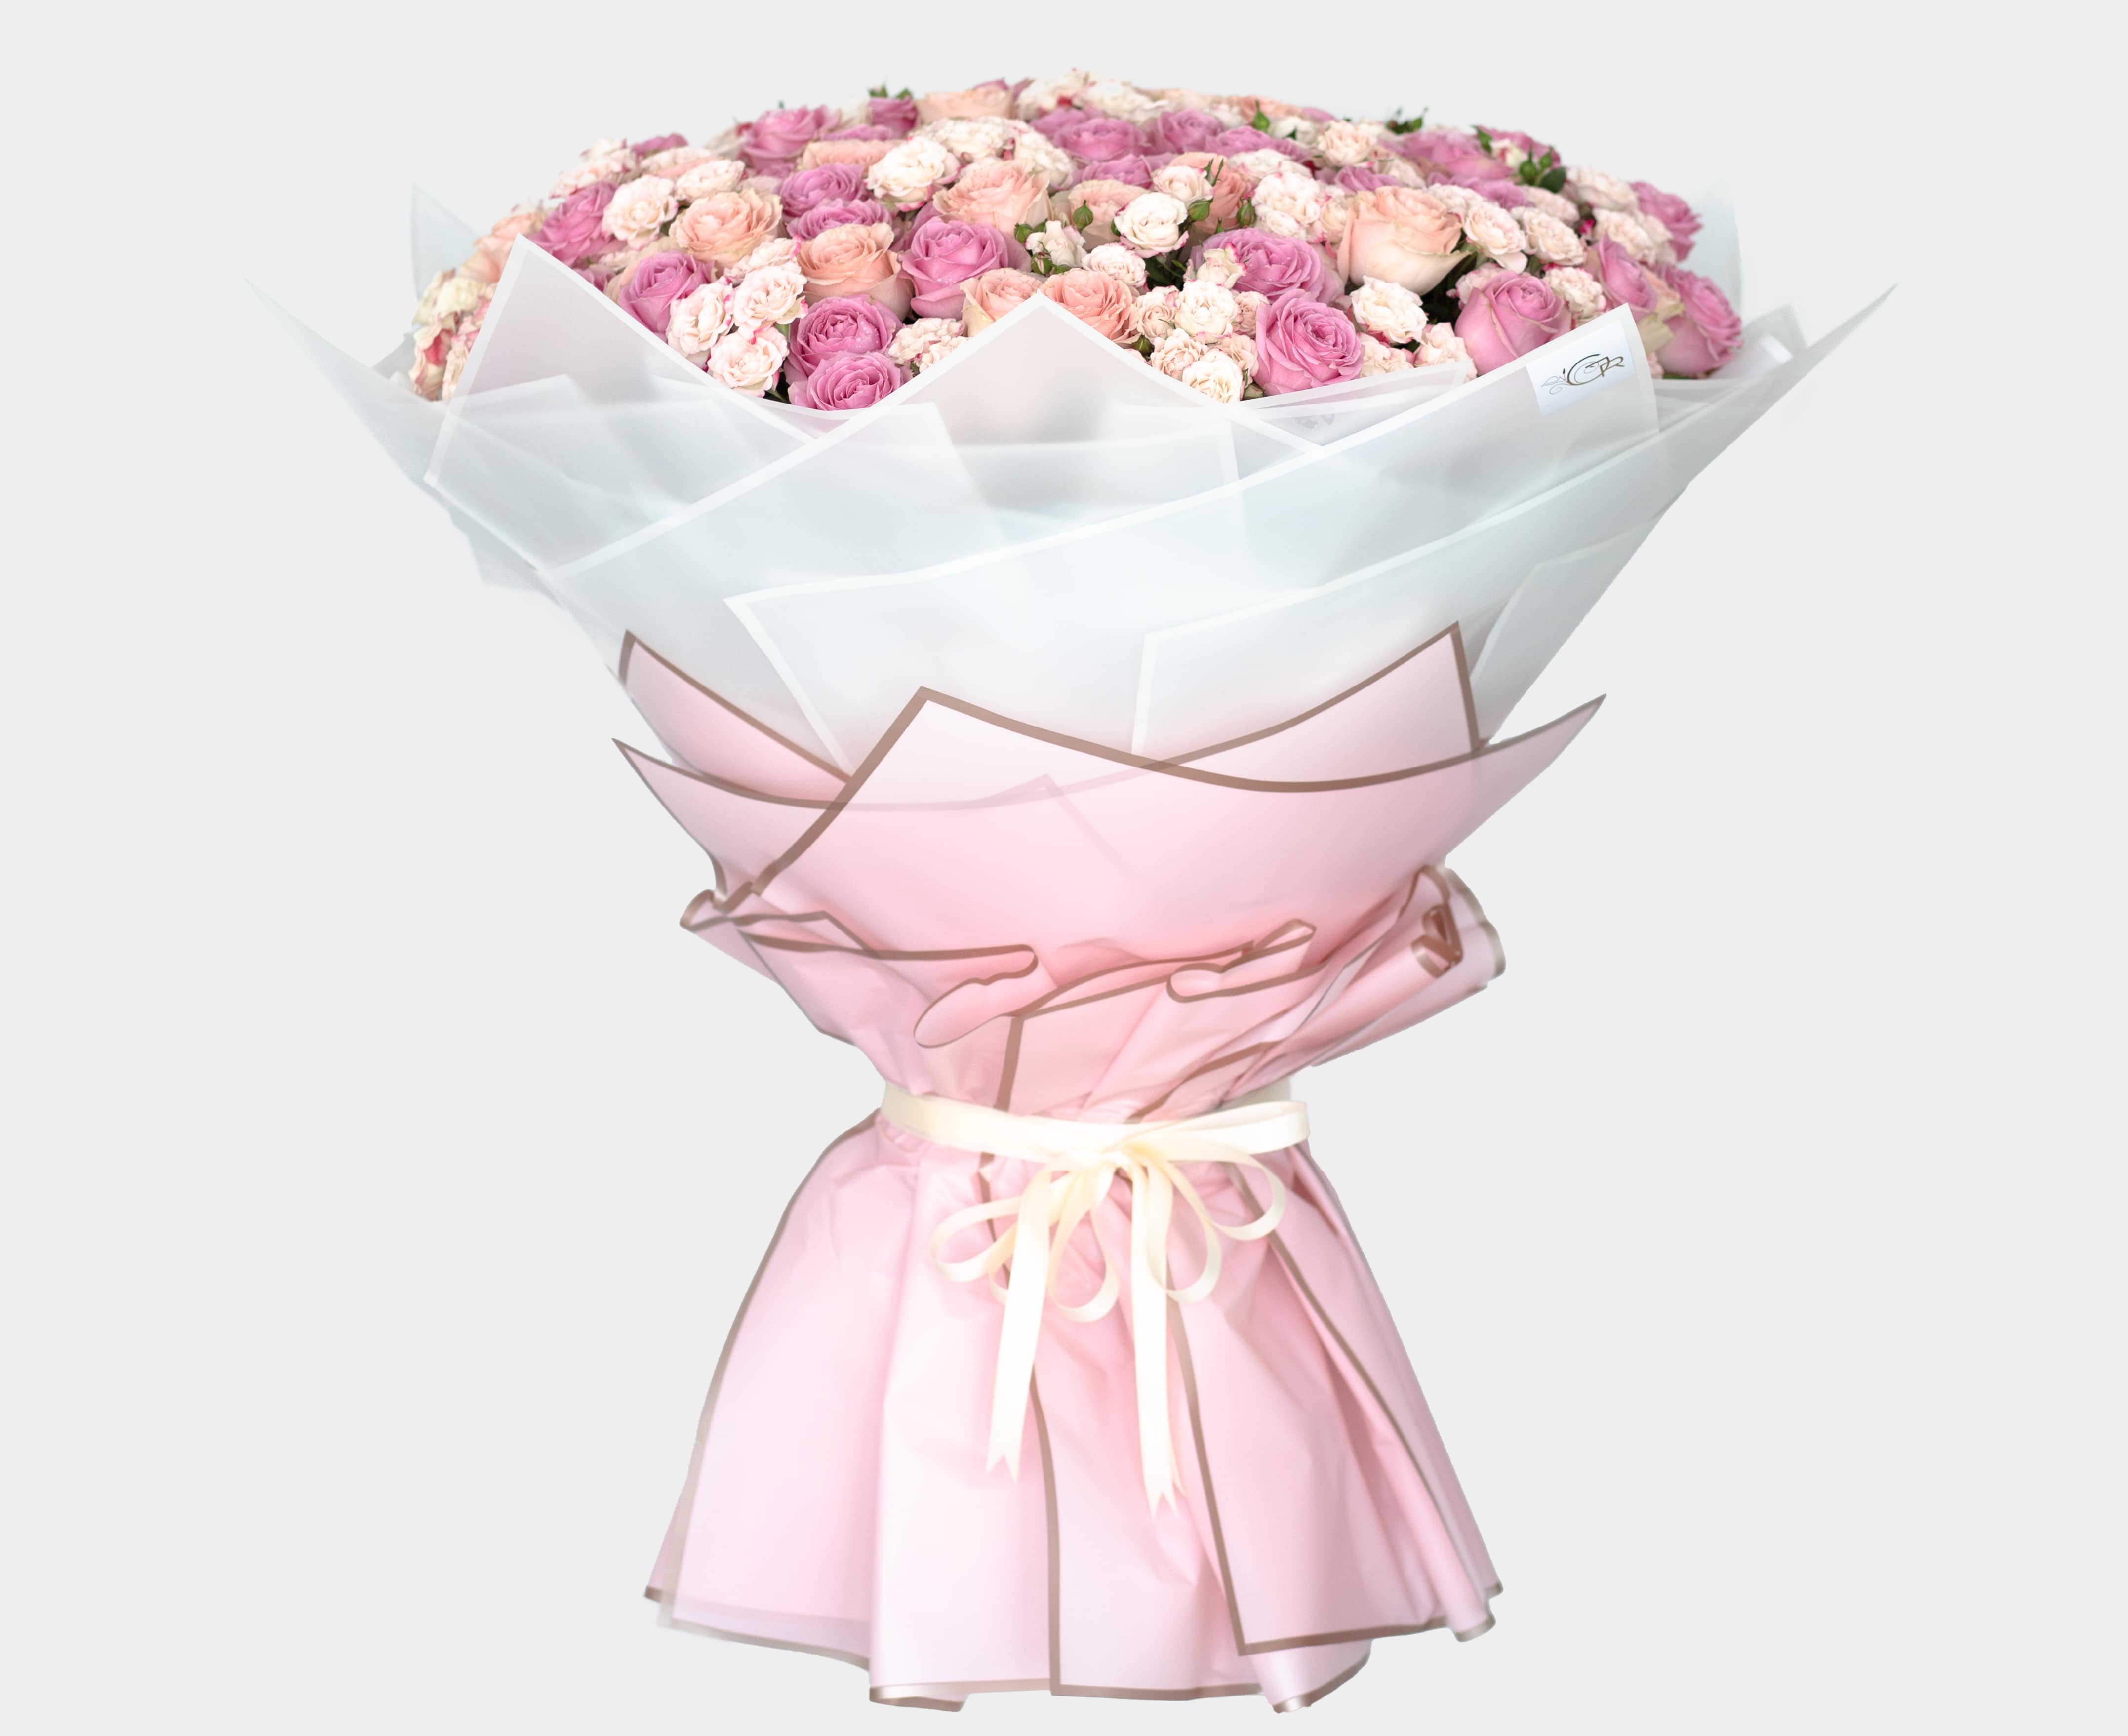 Giant Pink Bouquet